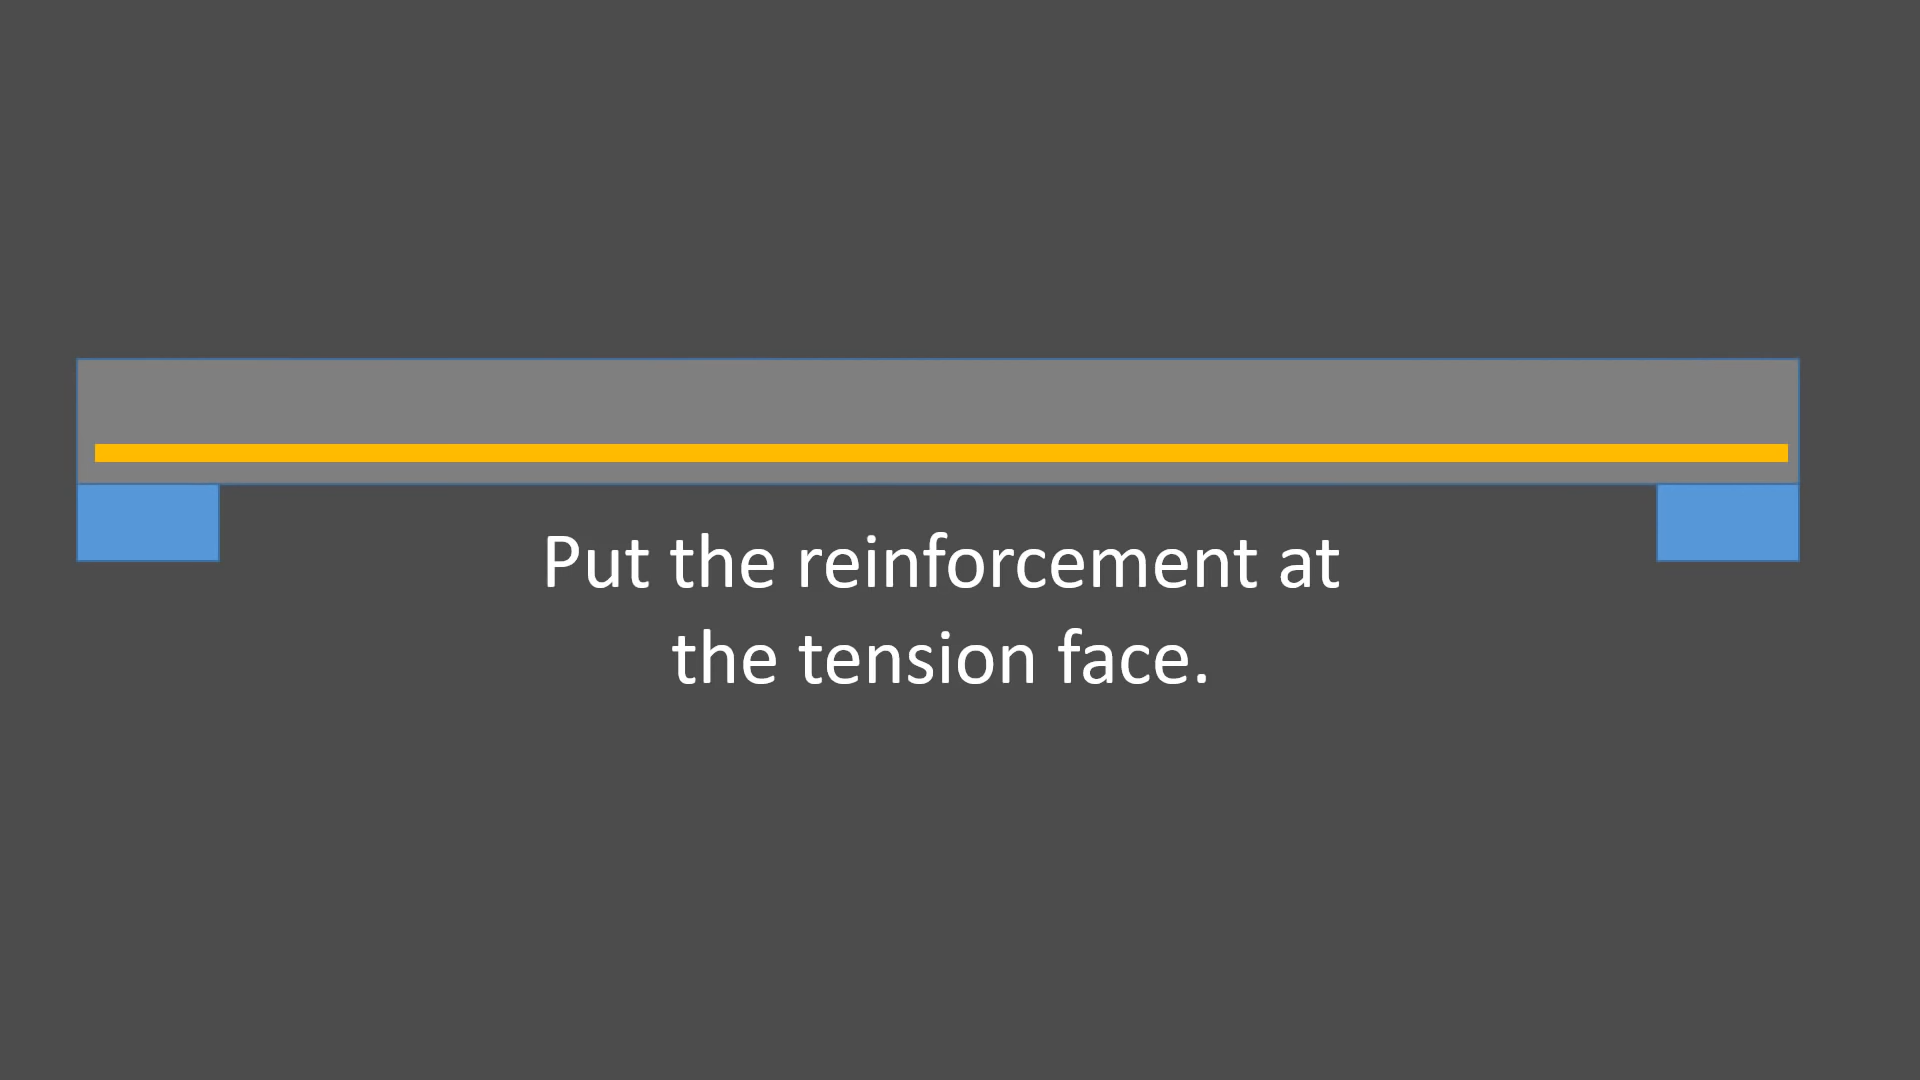 Put the reinforcement at the tension face